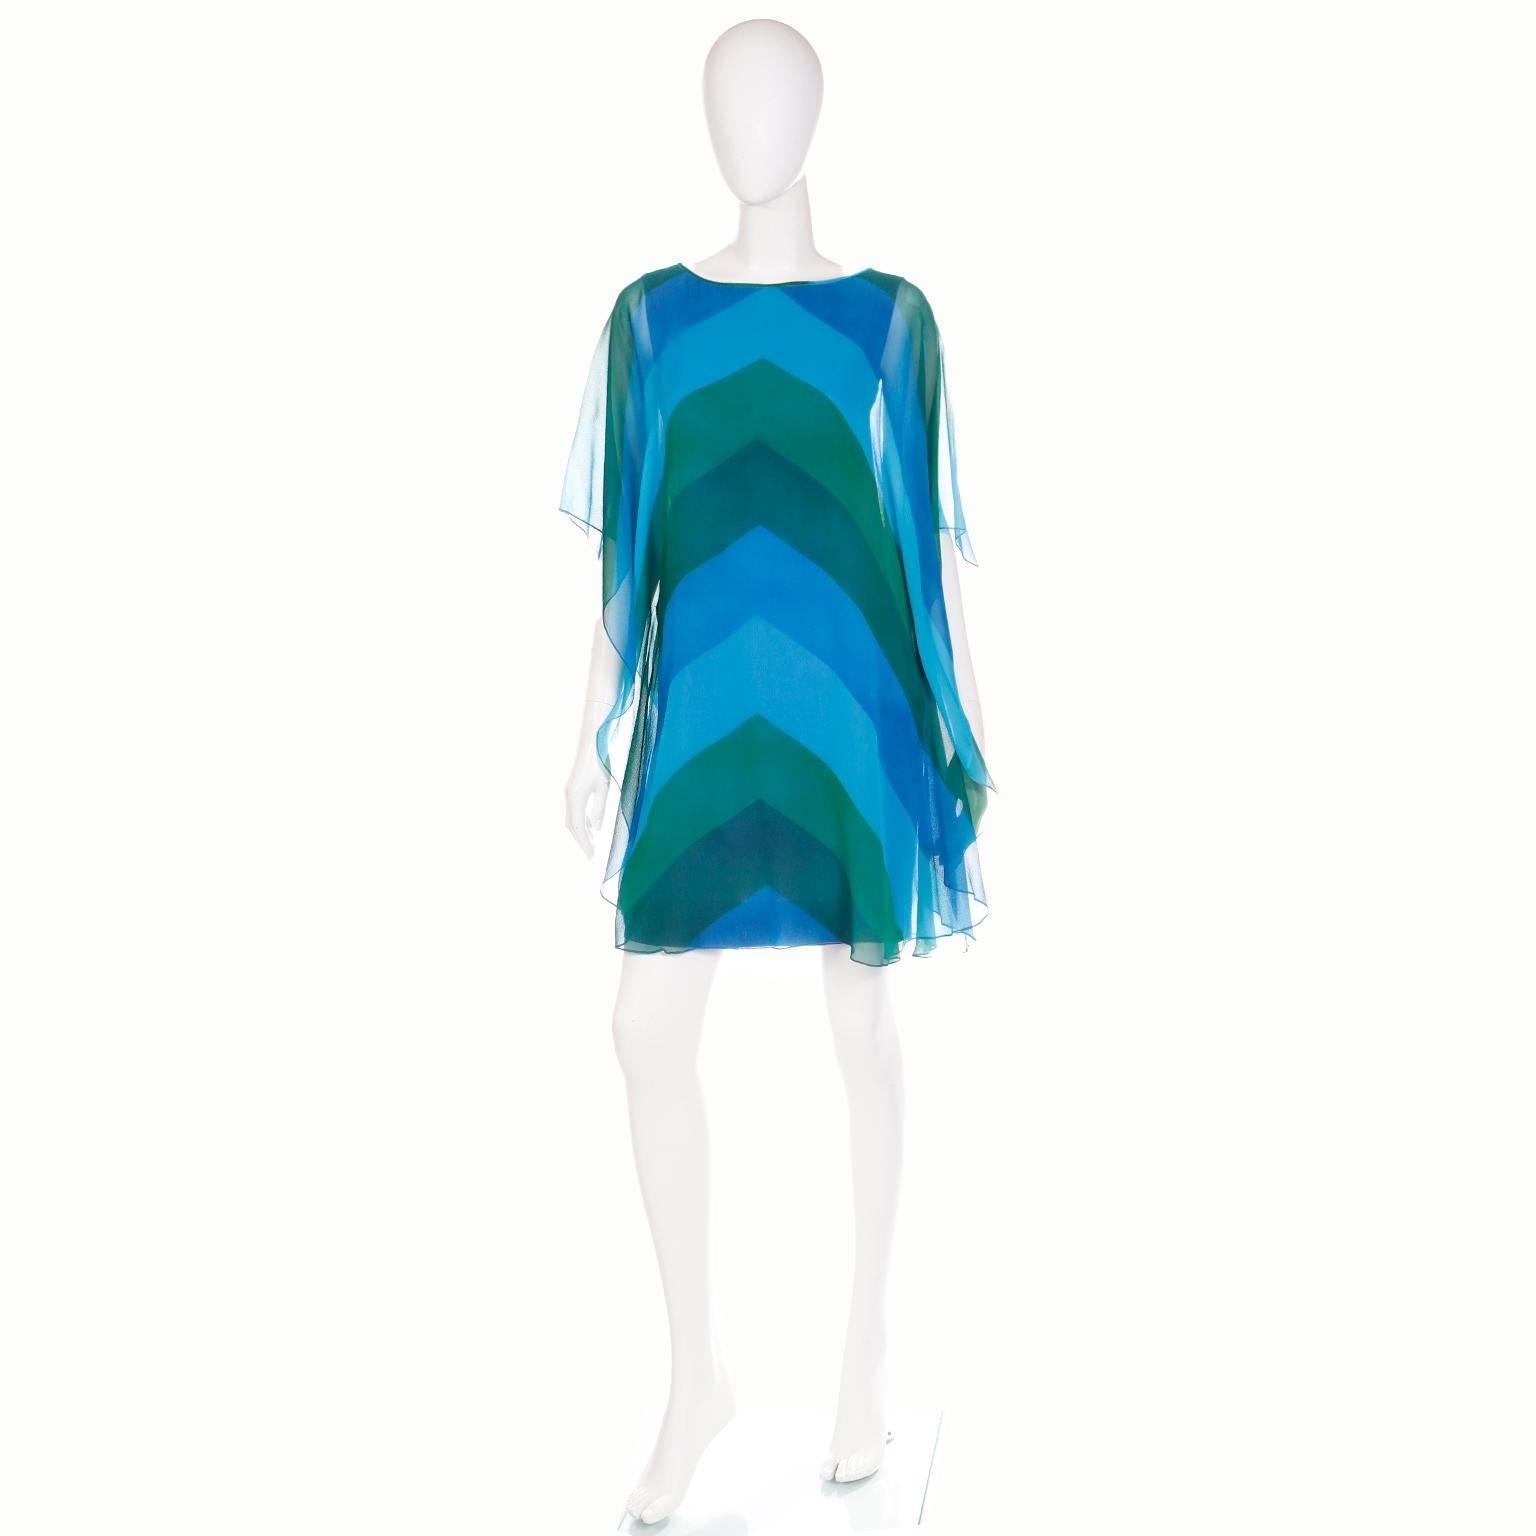 This stunning 1960's vintage dress is one of the prettiest Summer dresses we have seen.  The under dress is a fitted purple sleeveless sheath, but it is accentuated with an overlay of exquisite blue and green silk chiffon in a chevron stripe print.